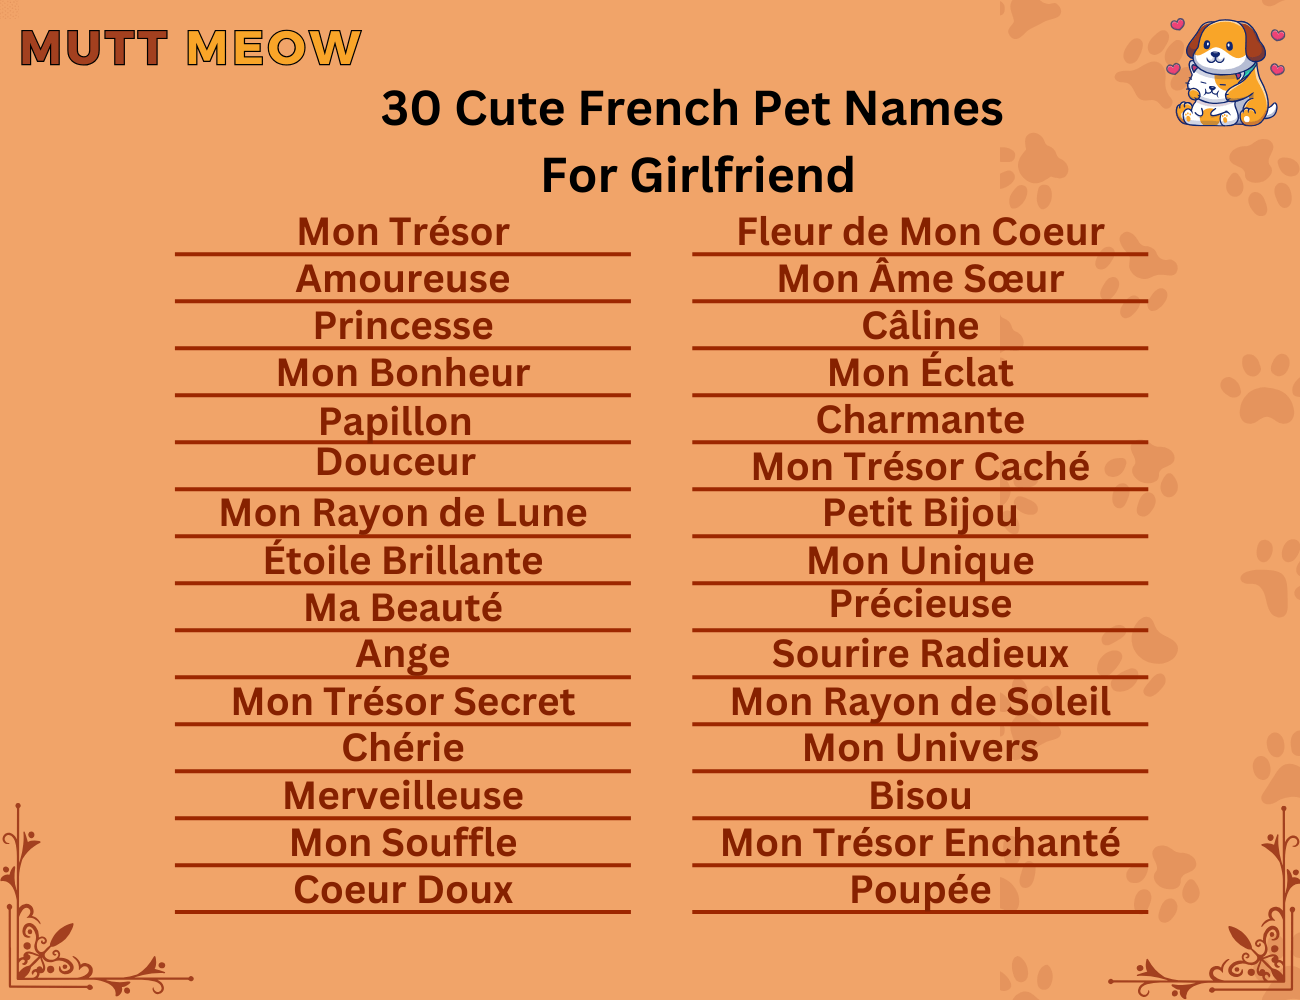 30 Cute French Pet Names For Girlfriend